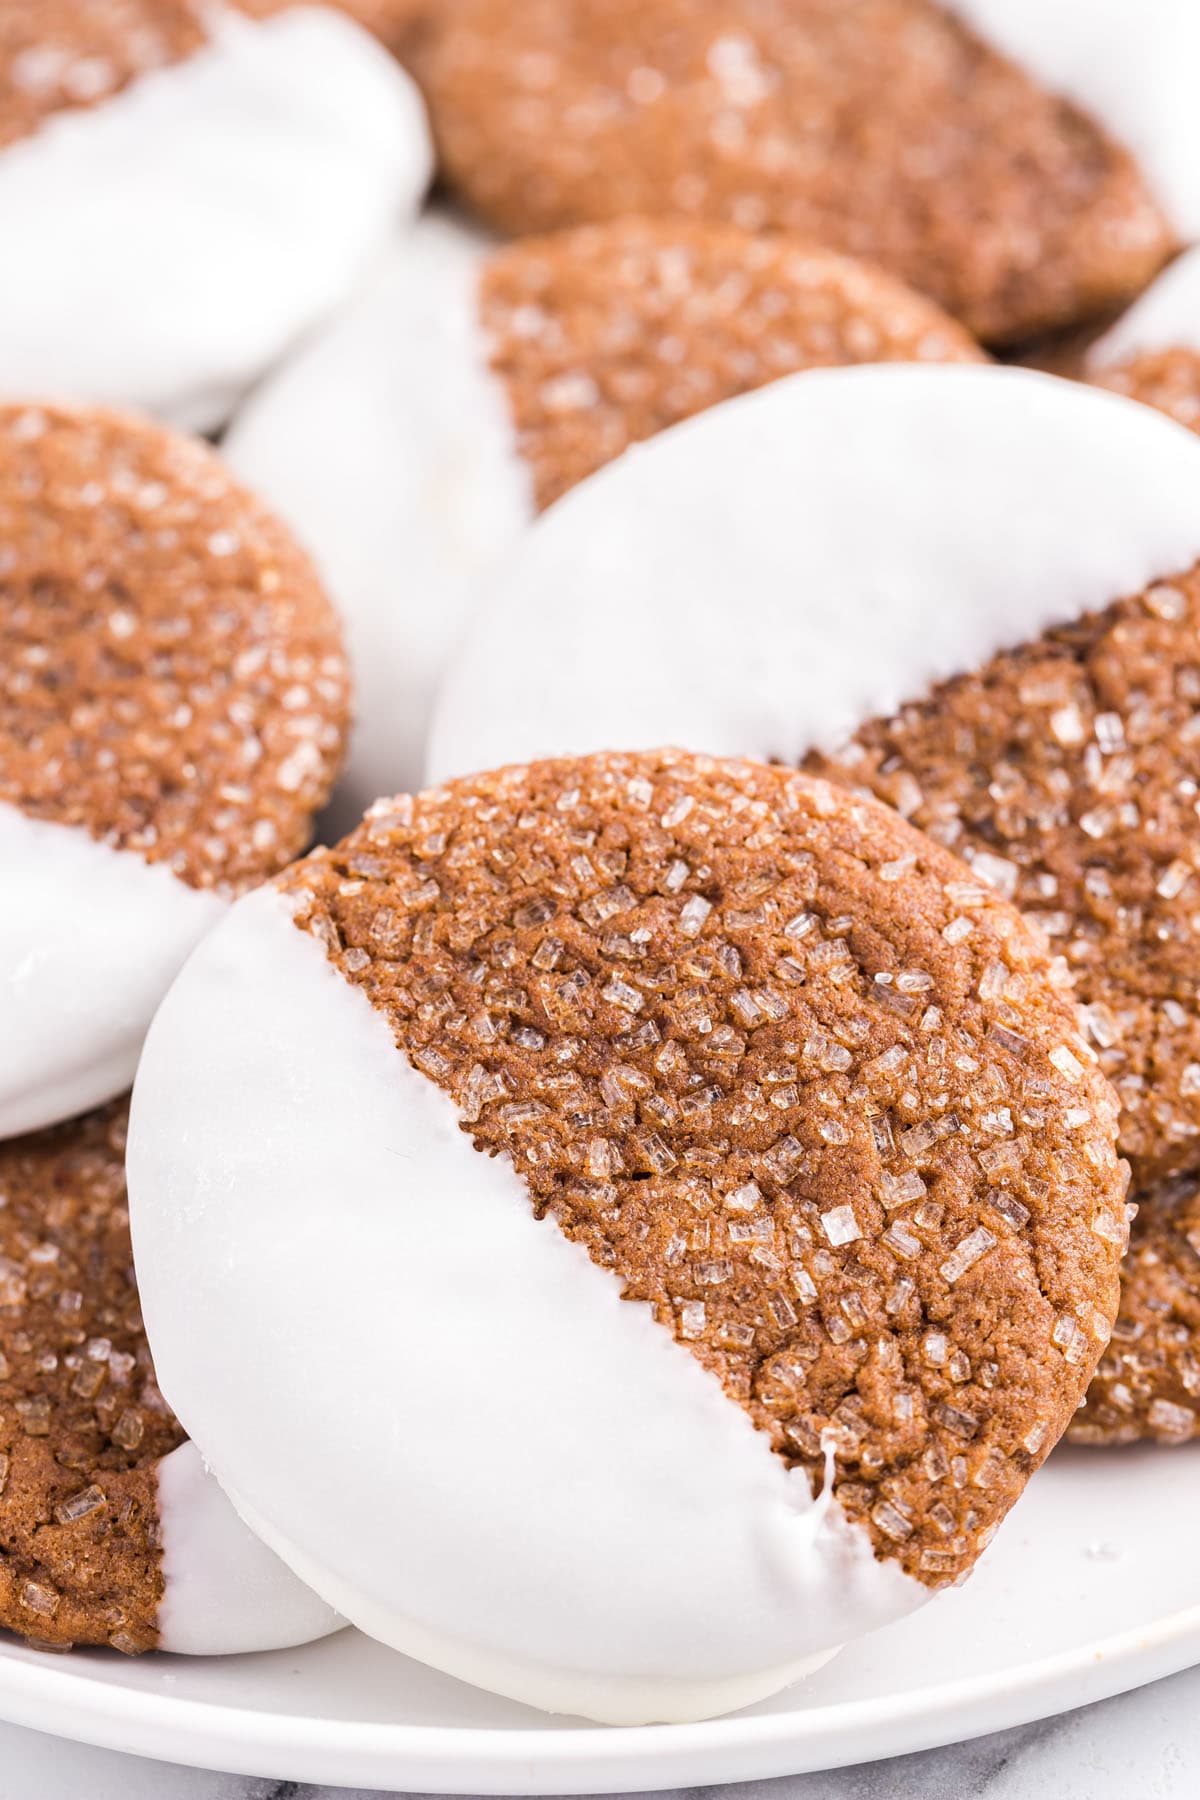 white chocolate dipped ginger cookies